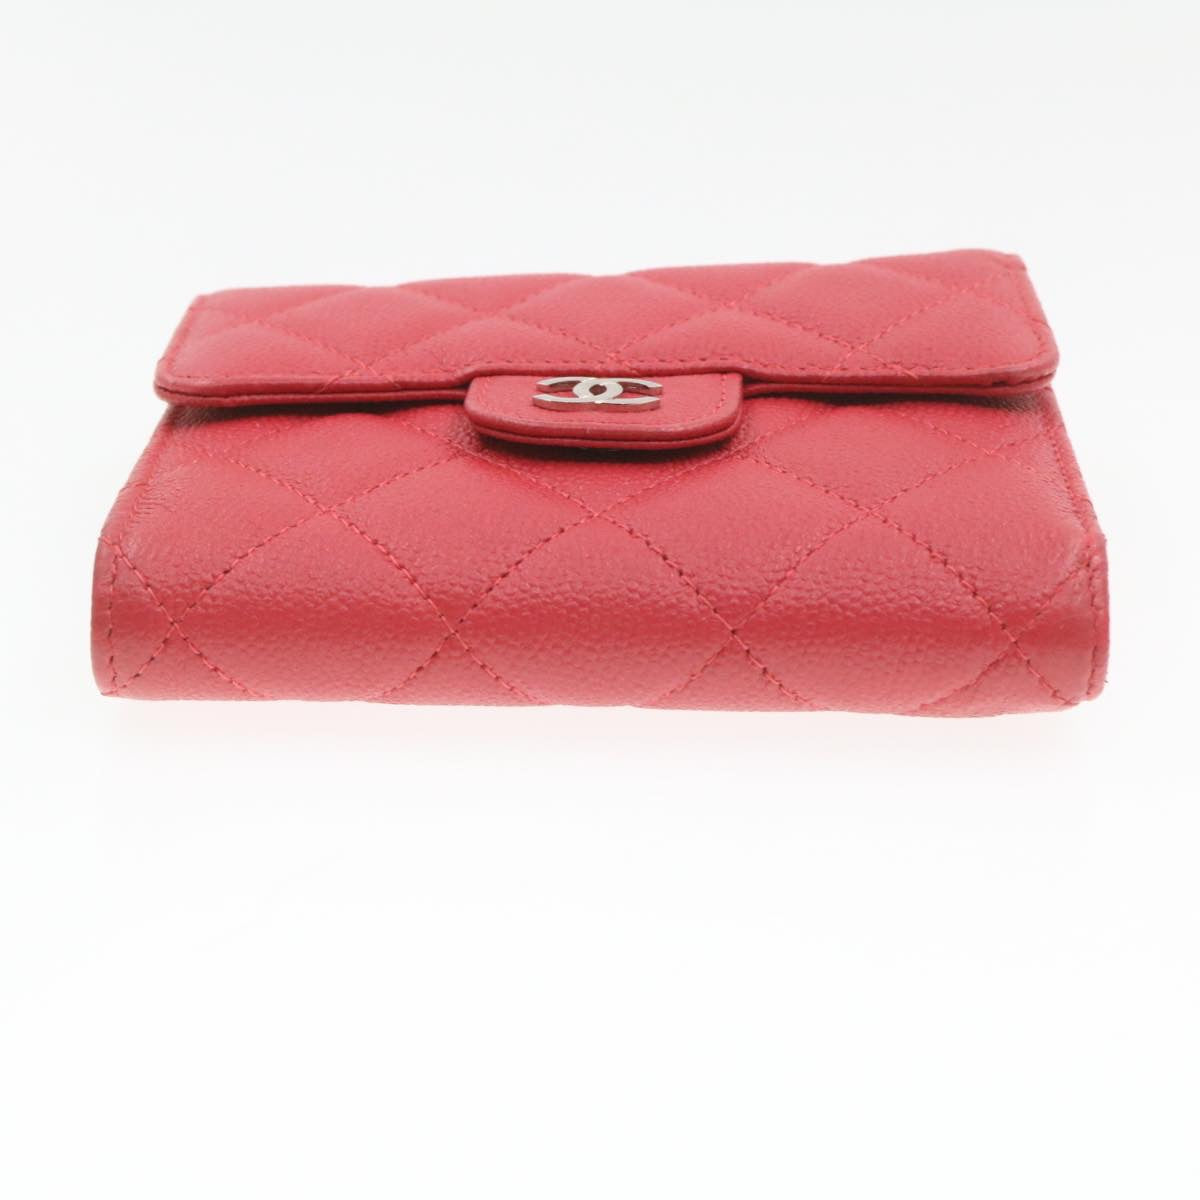 CHANEL Caviar Skin Matelasse Wallet Pink Red CC Auth 18734A